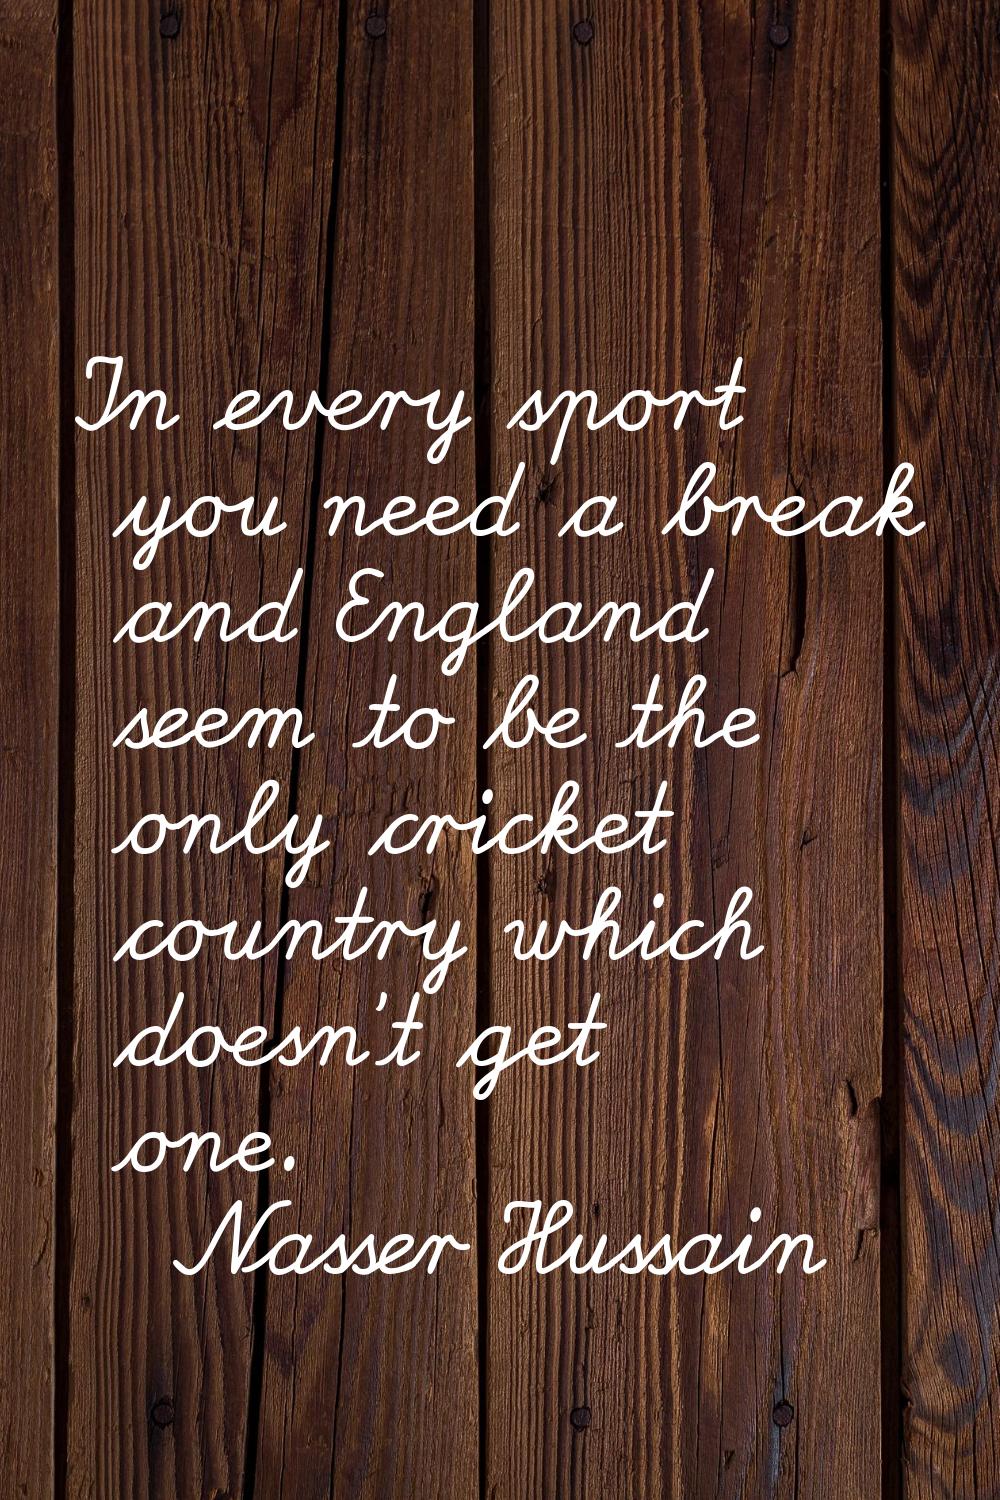 In every sport you need a break and England seem to be the only cricket country which doesn't get o